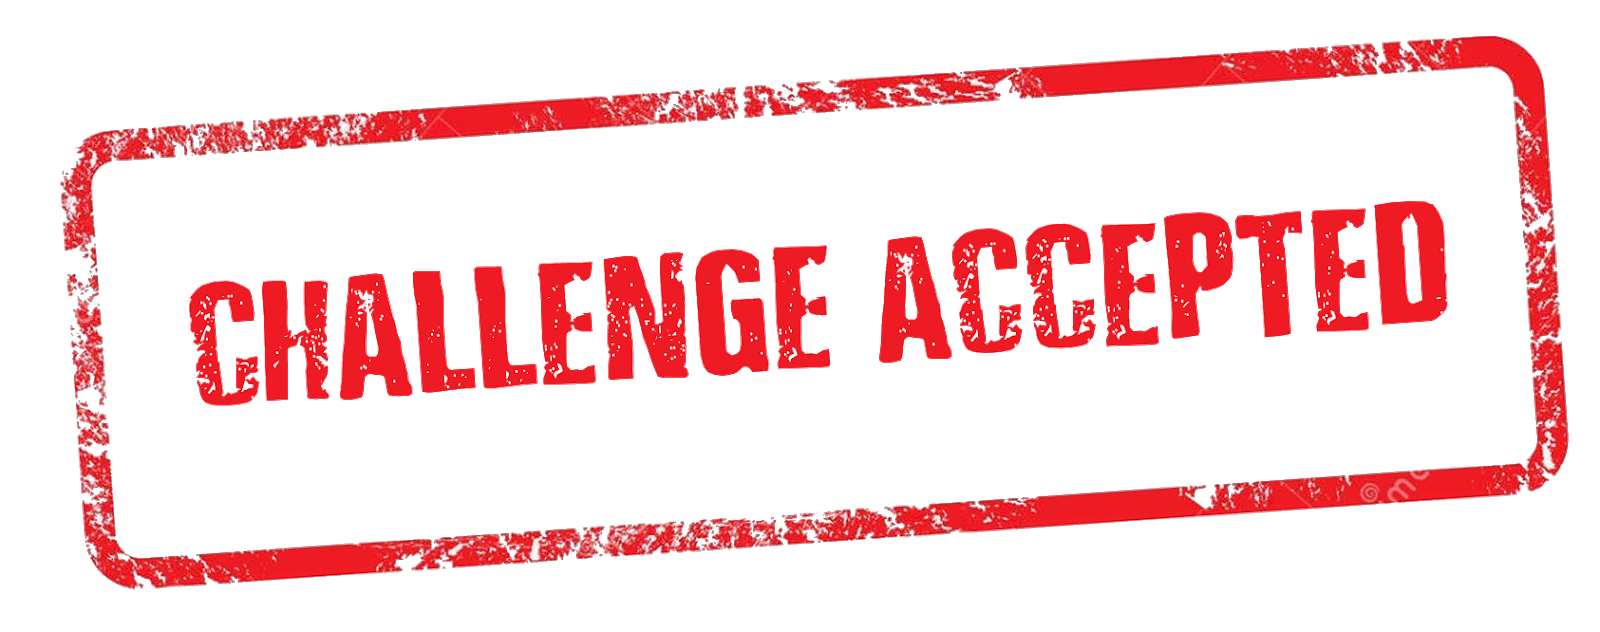 Accepted way. Challenge accepted. ЧЕЛЛЕНДЖ accepted. Challenge надпись. ЧЕЛЛЕНДЖ Мем.